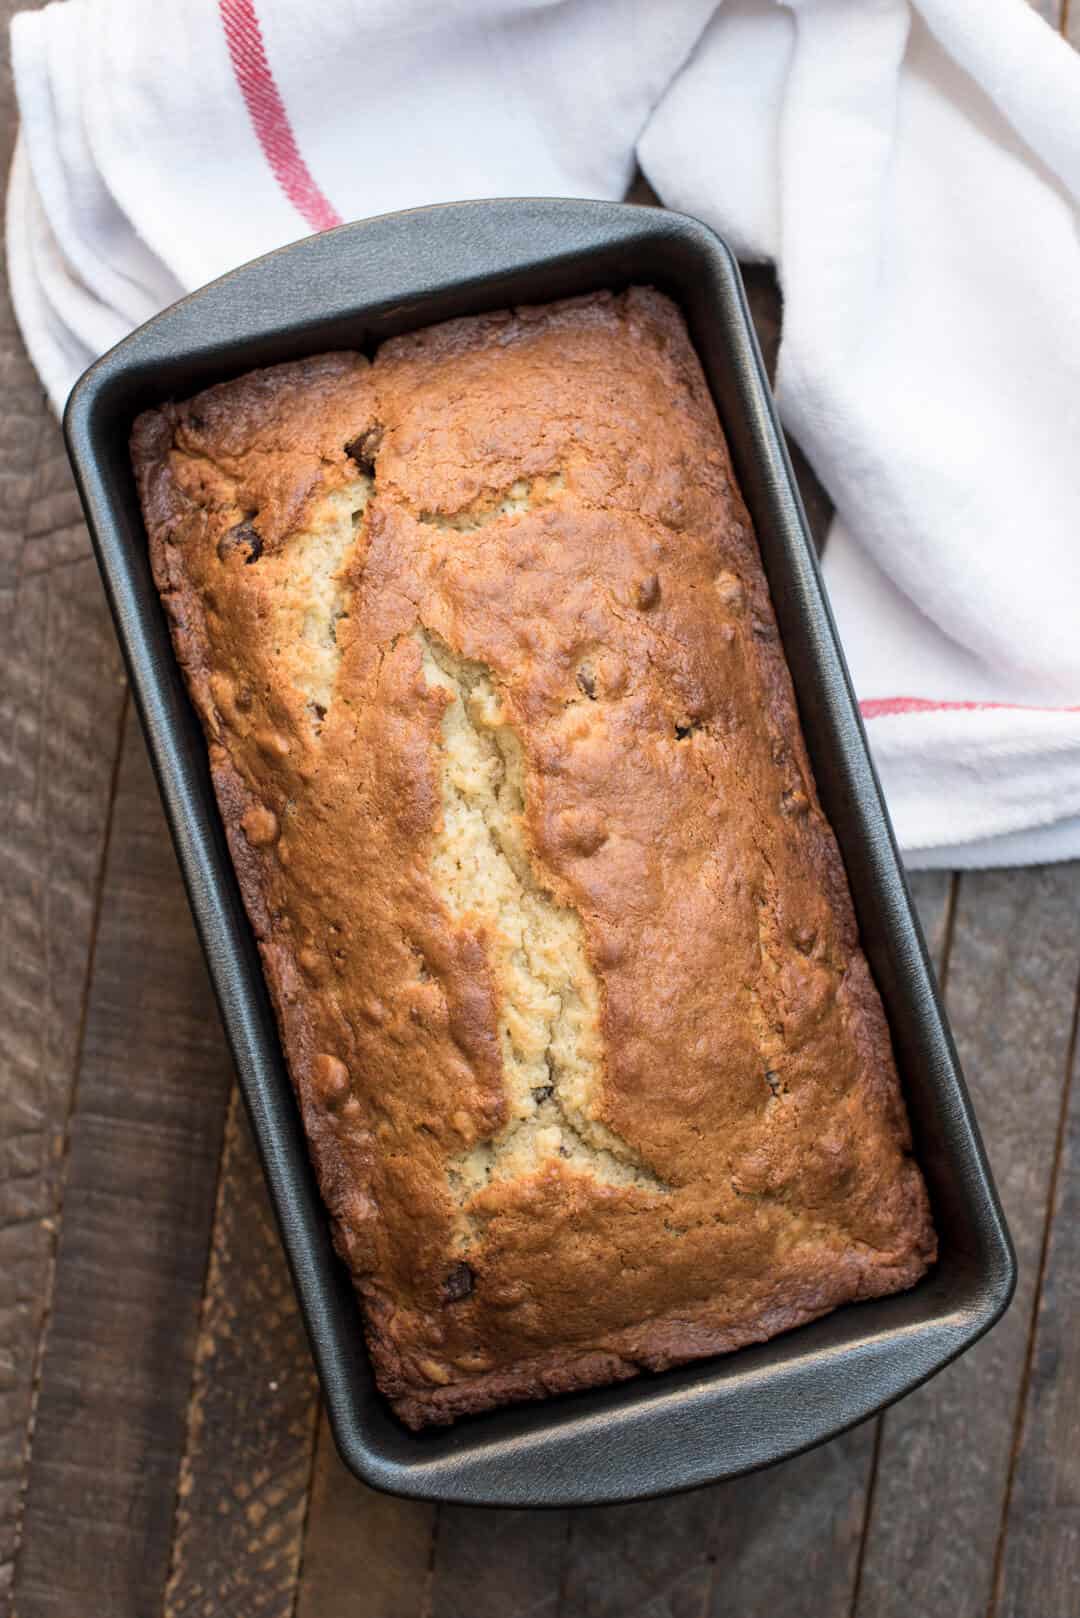 An over the top shot of the banana bread in a loaf pan on a dark wood surface.